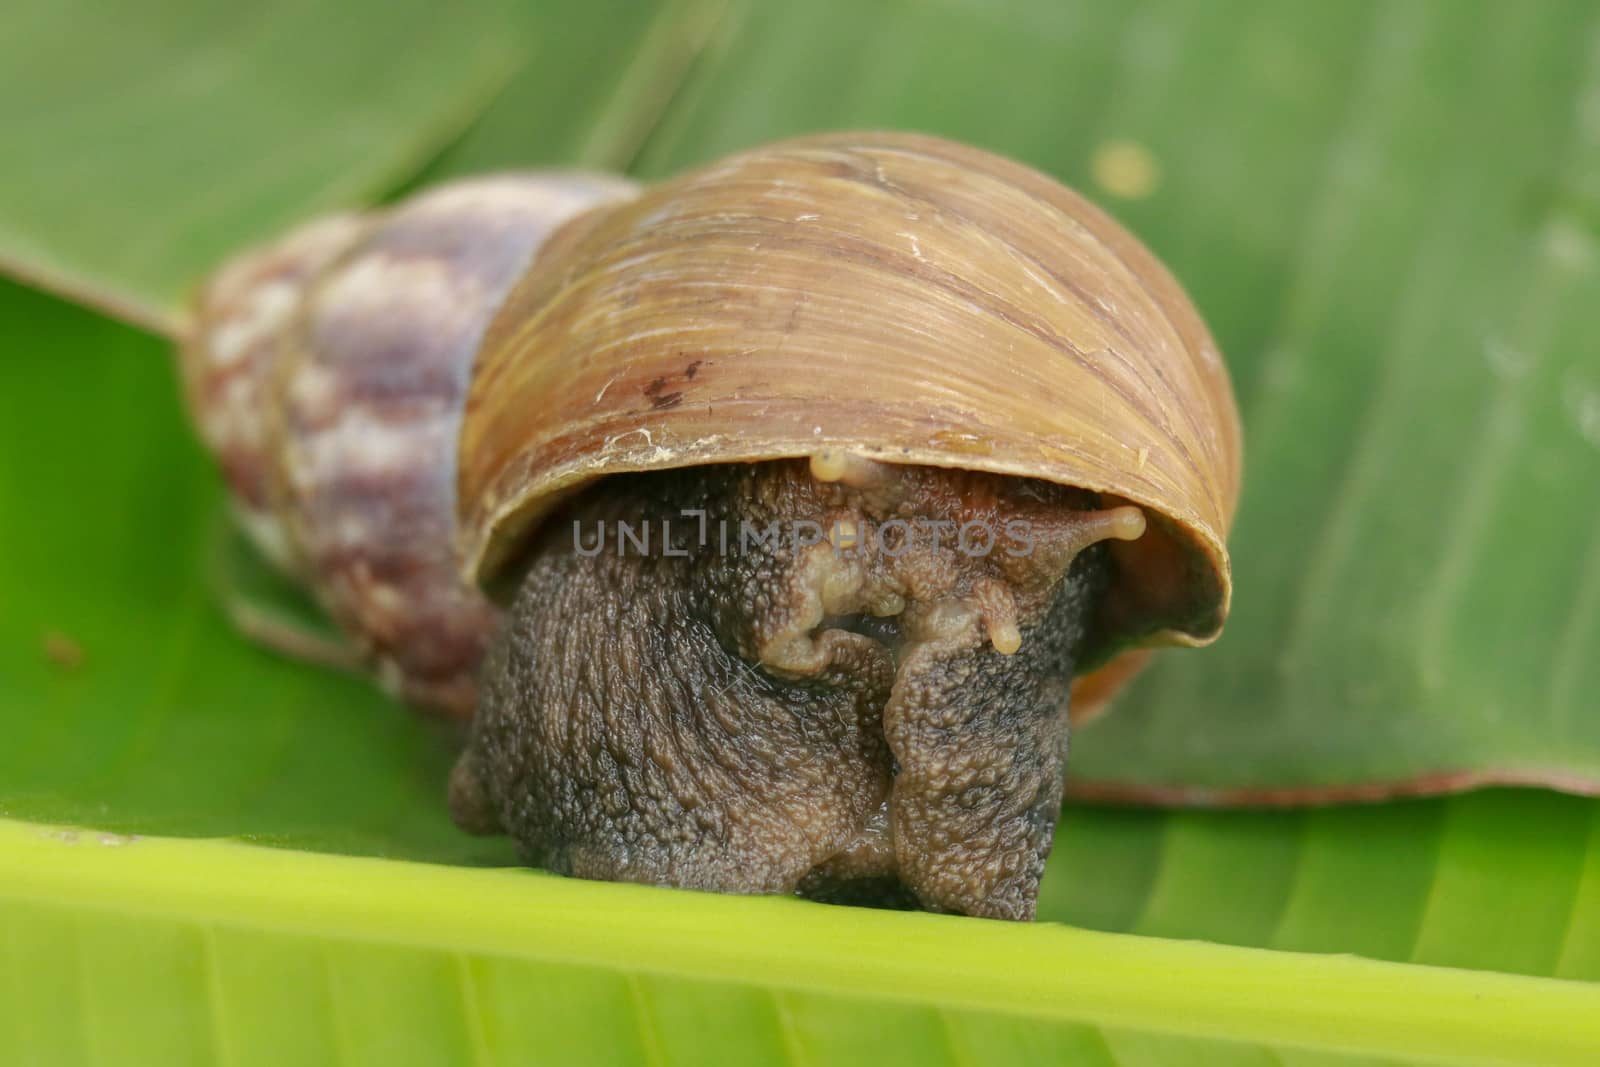 A view of land garden snails, known as terrestrial pulmonate gastropod molluscs on the green grass under the morning natural sun. A taste of spring or summer time. Also, represent great patience by Sanatana2008